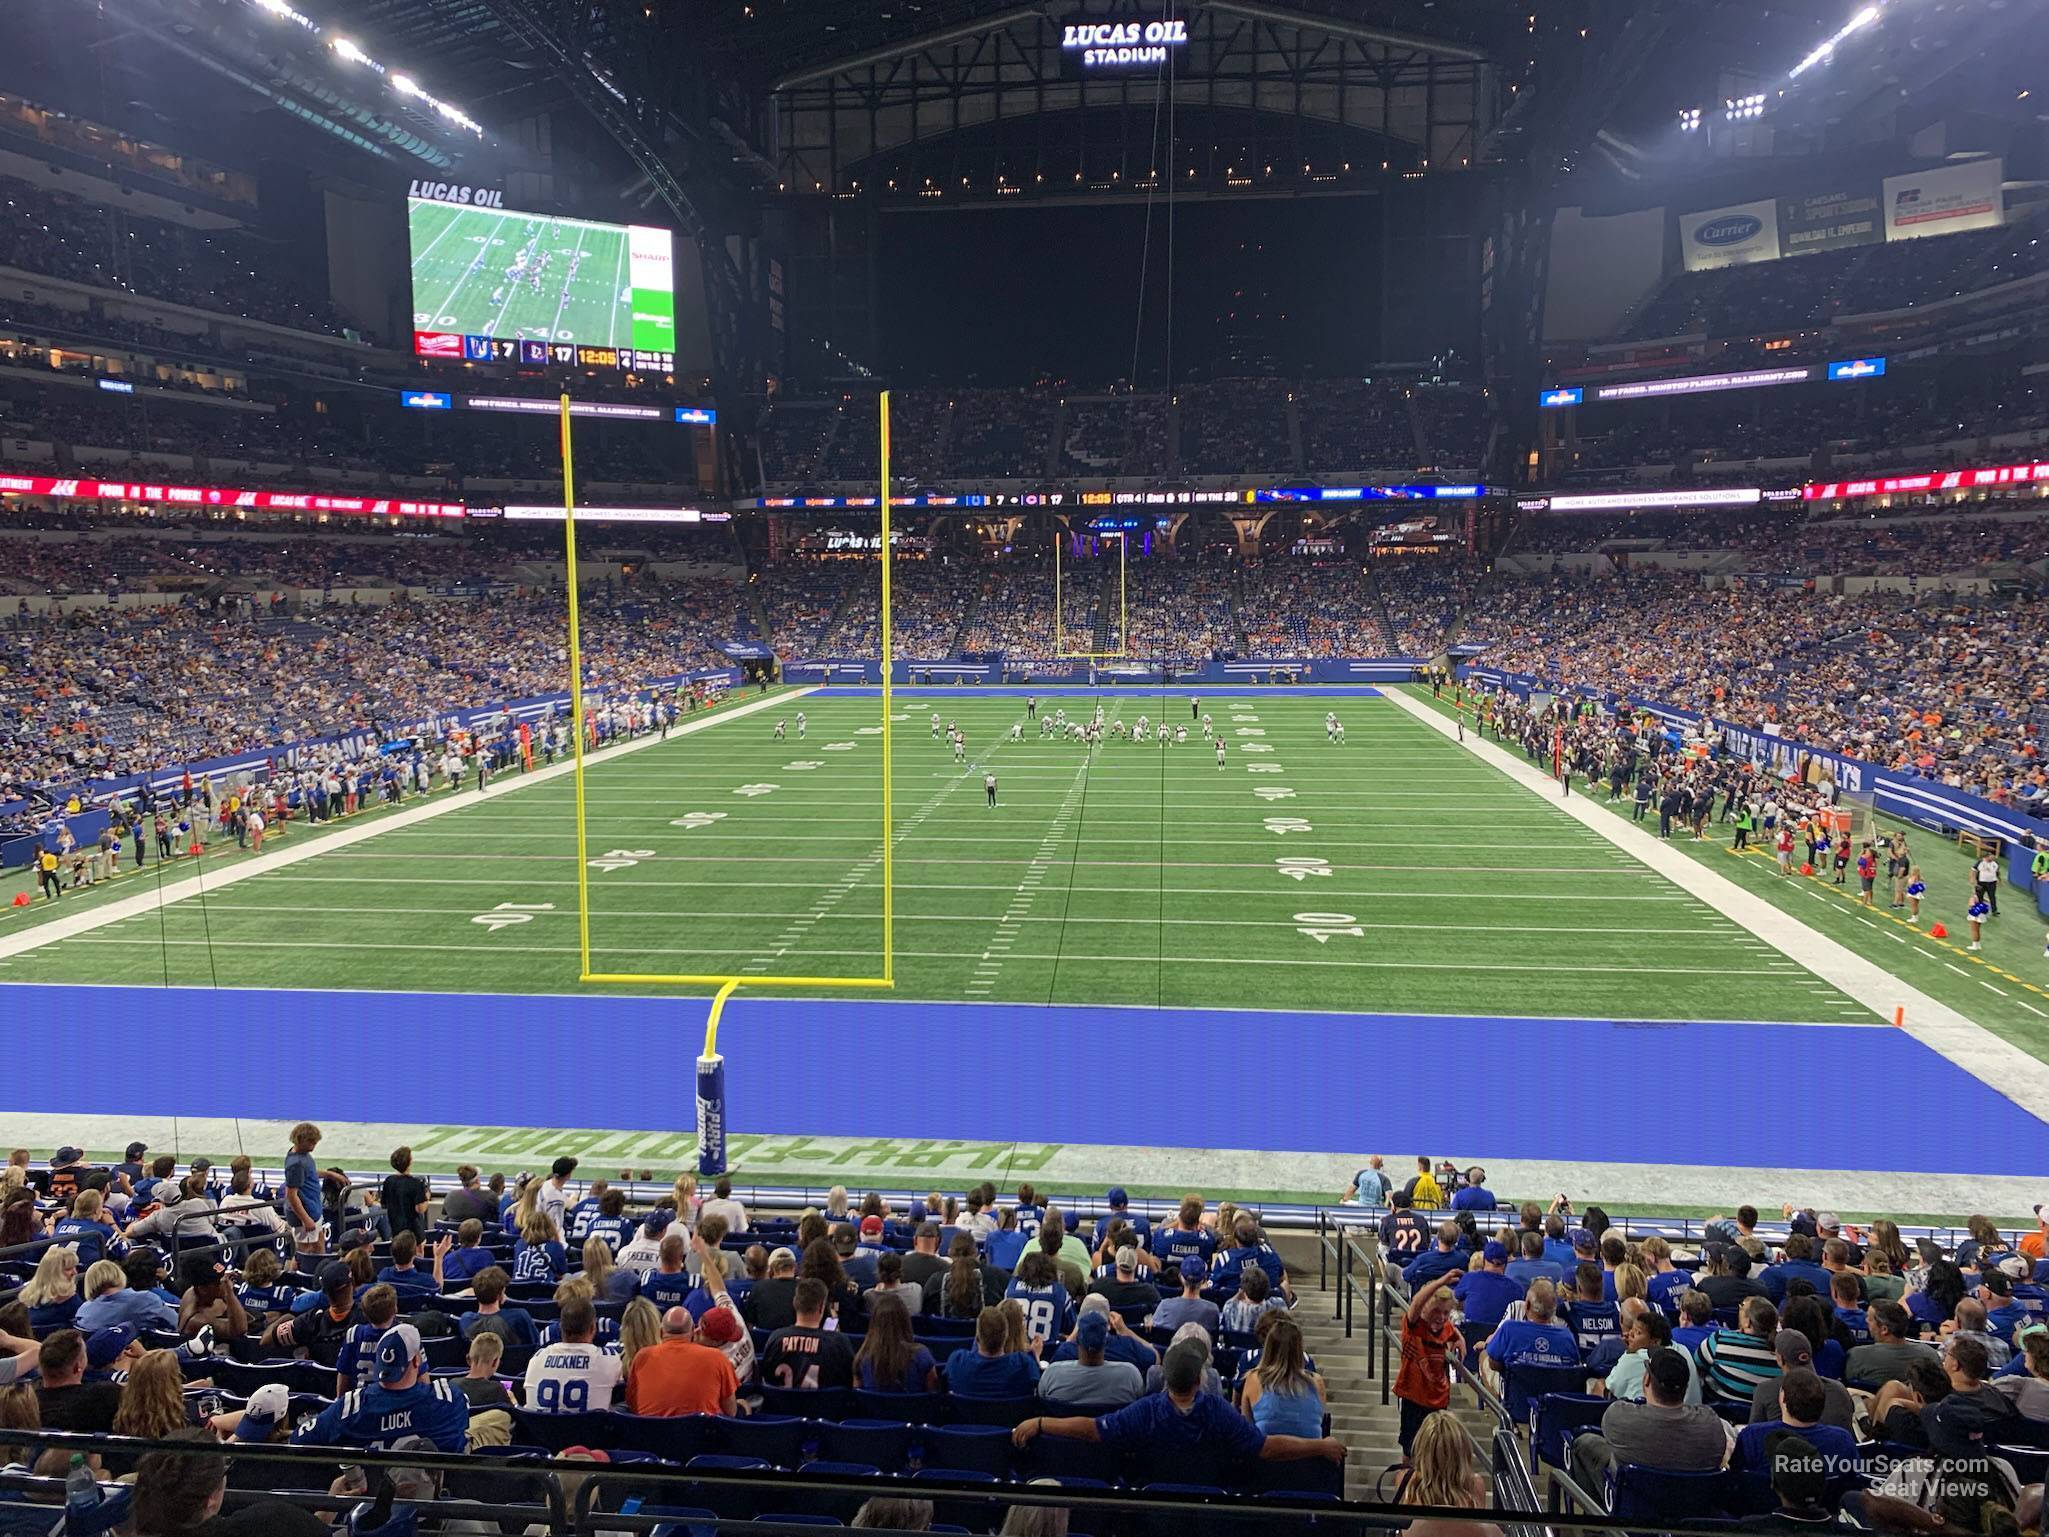 section 227, row 1 seat view  for football - lucas oil stadium